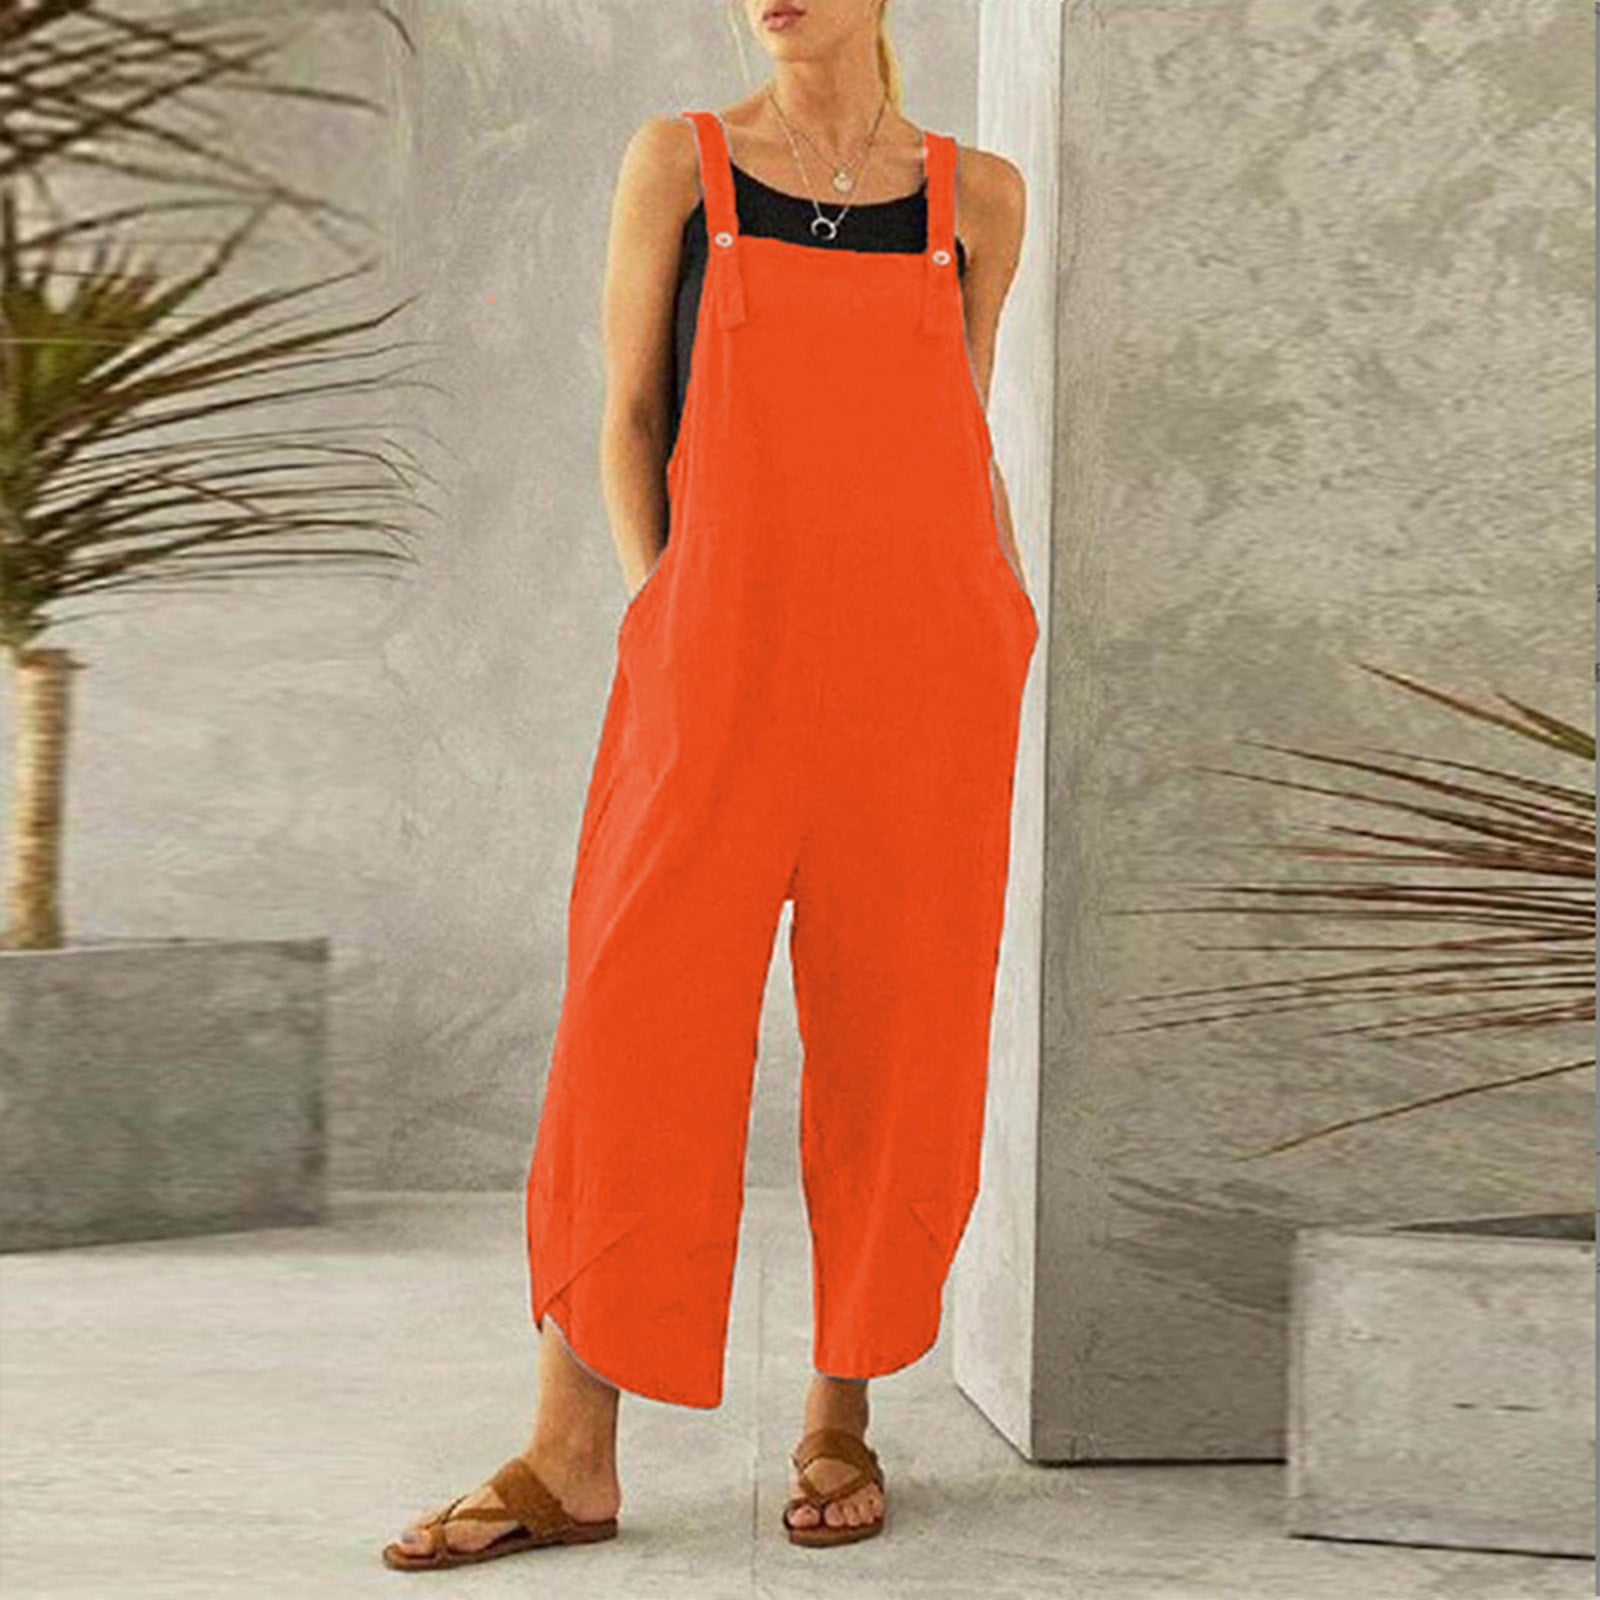 WNEGSTG Jumpsuits for Women Fashion Casual Solid Pocket Romper Long ...